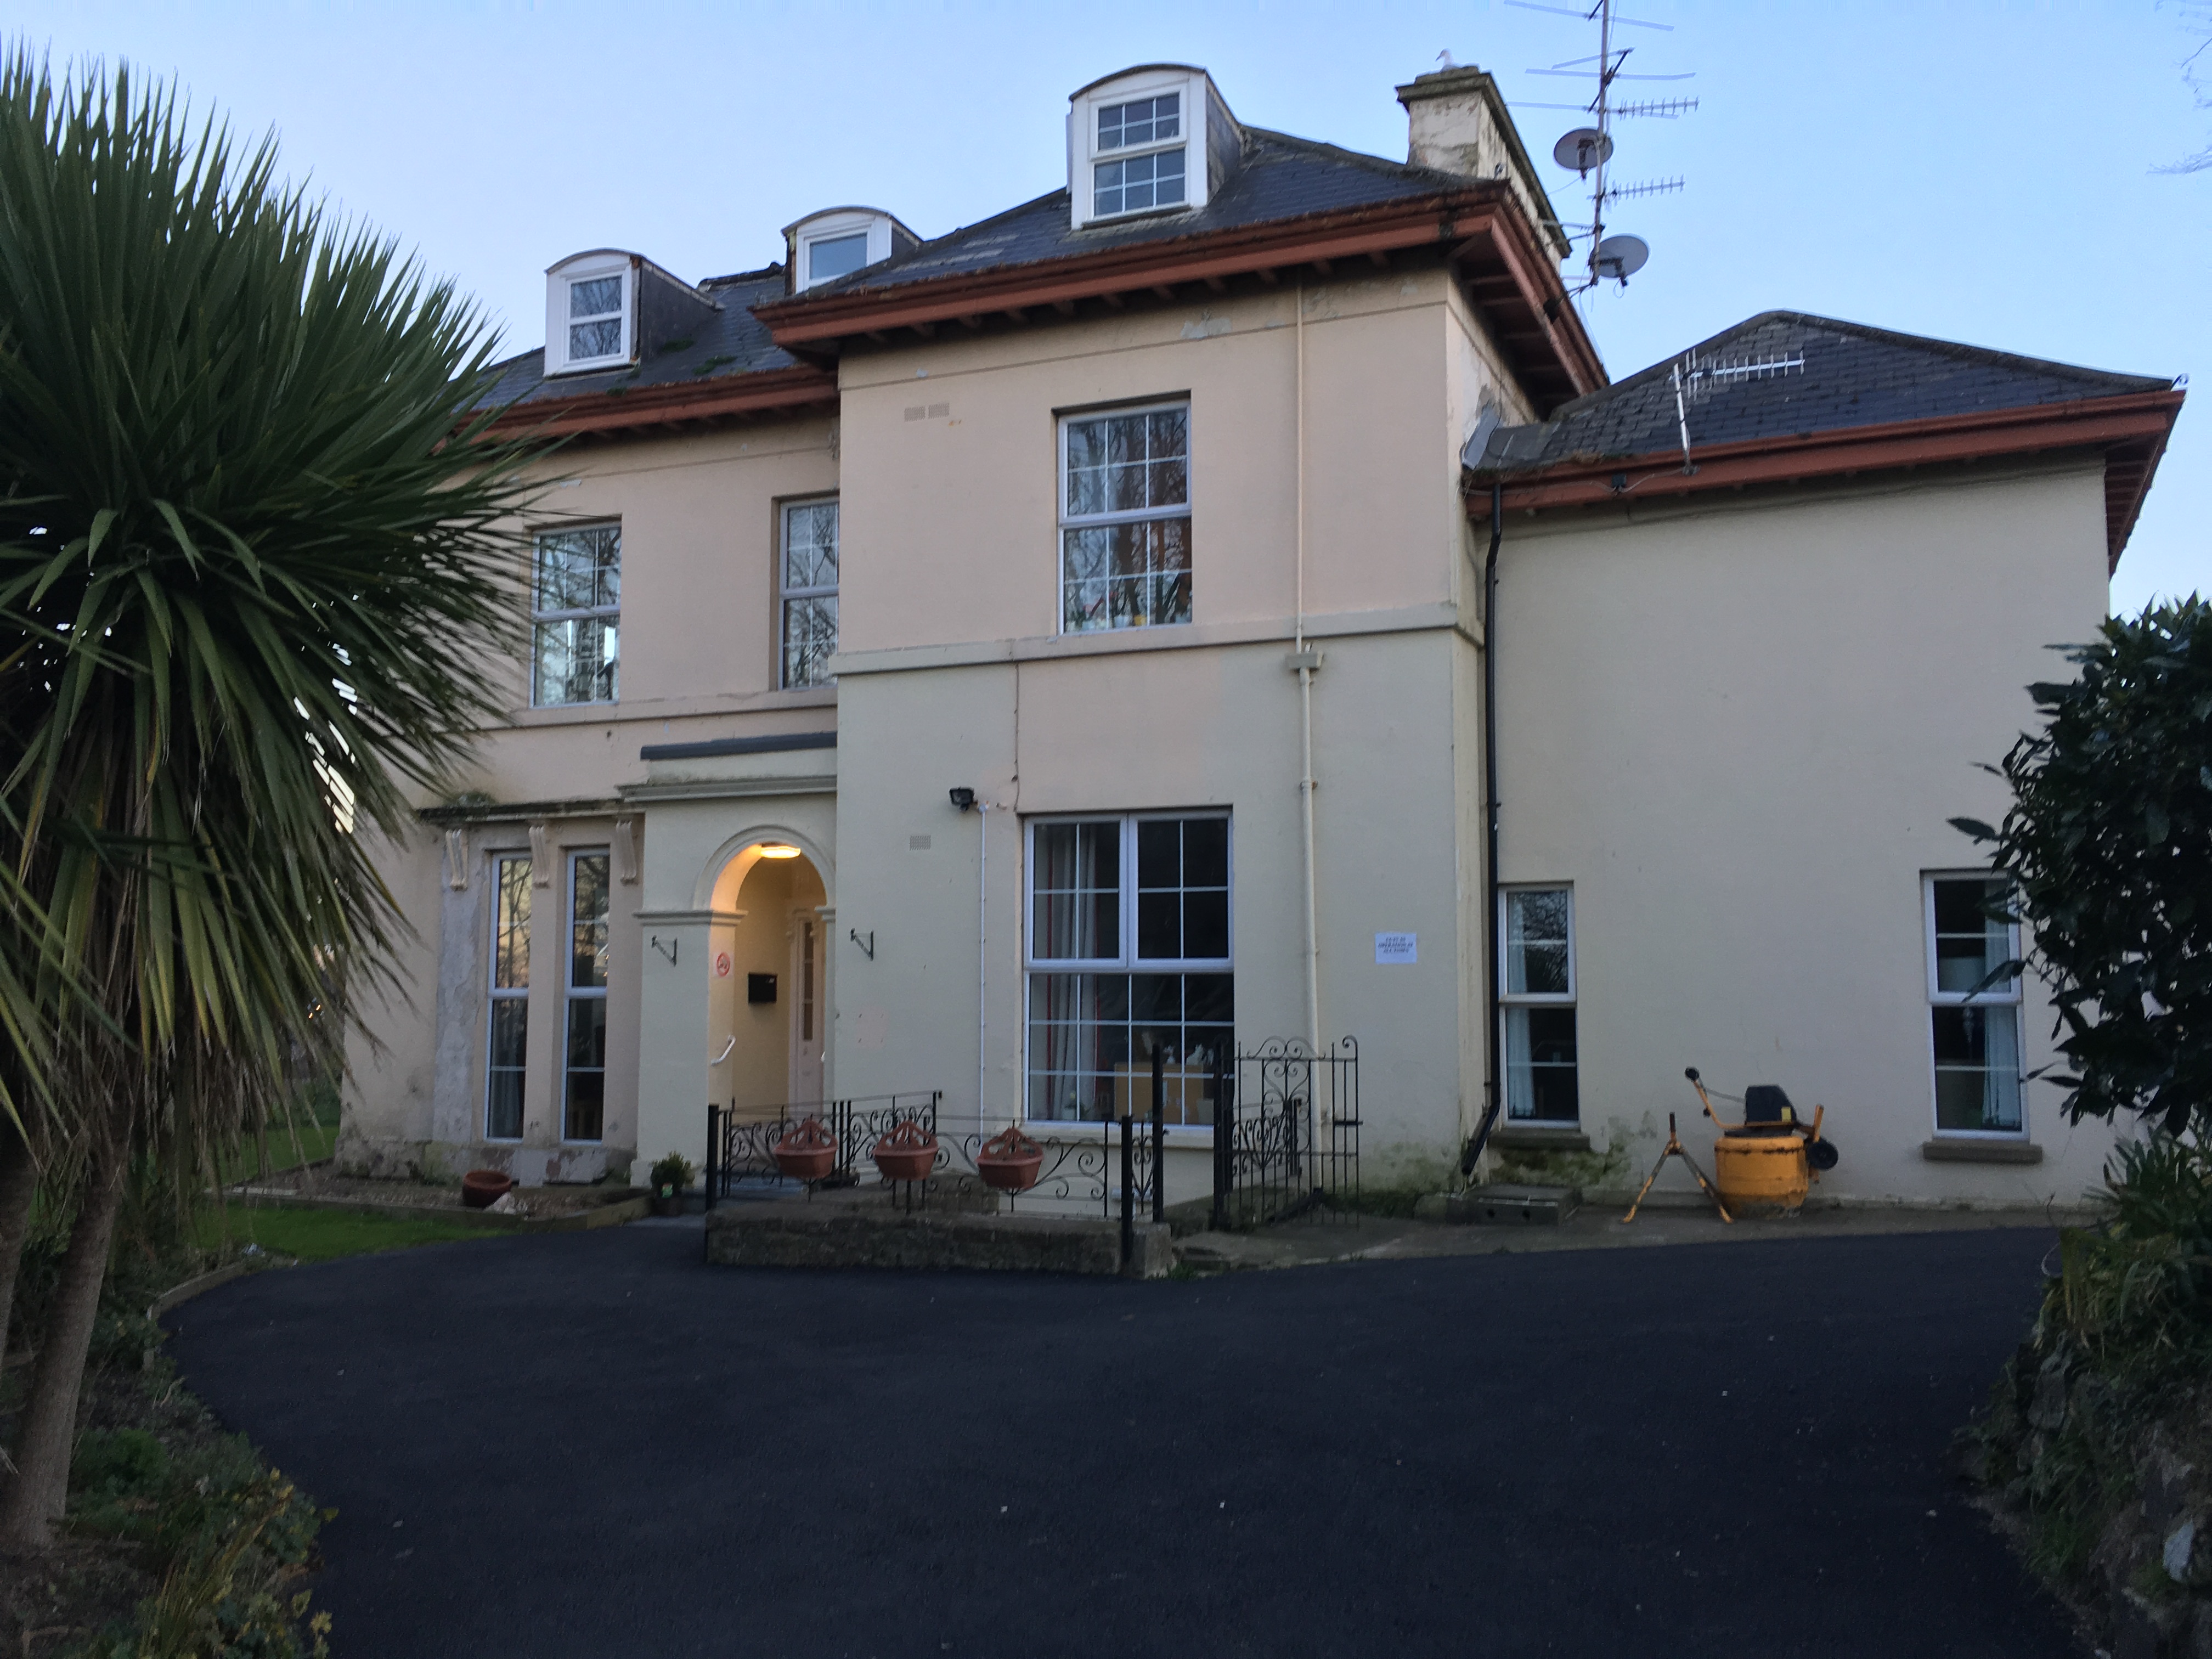 Belmont Grange care home exterior and grounds